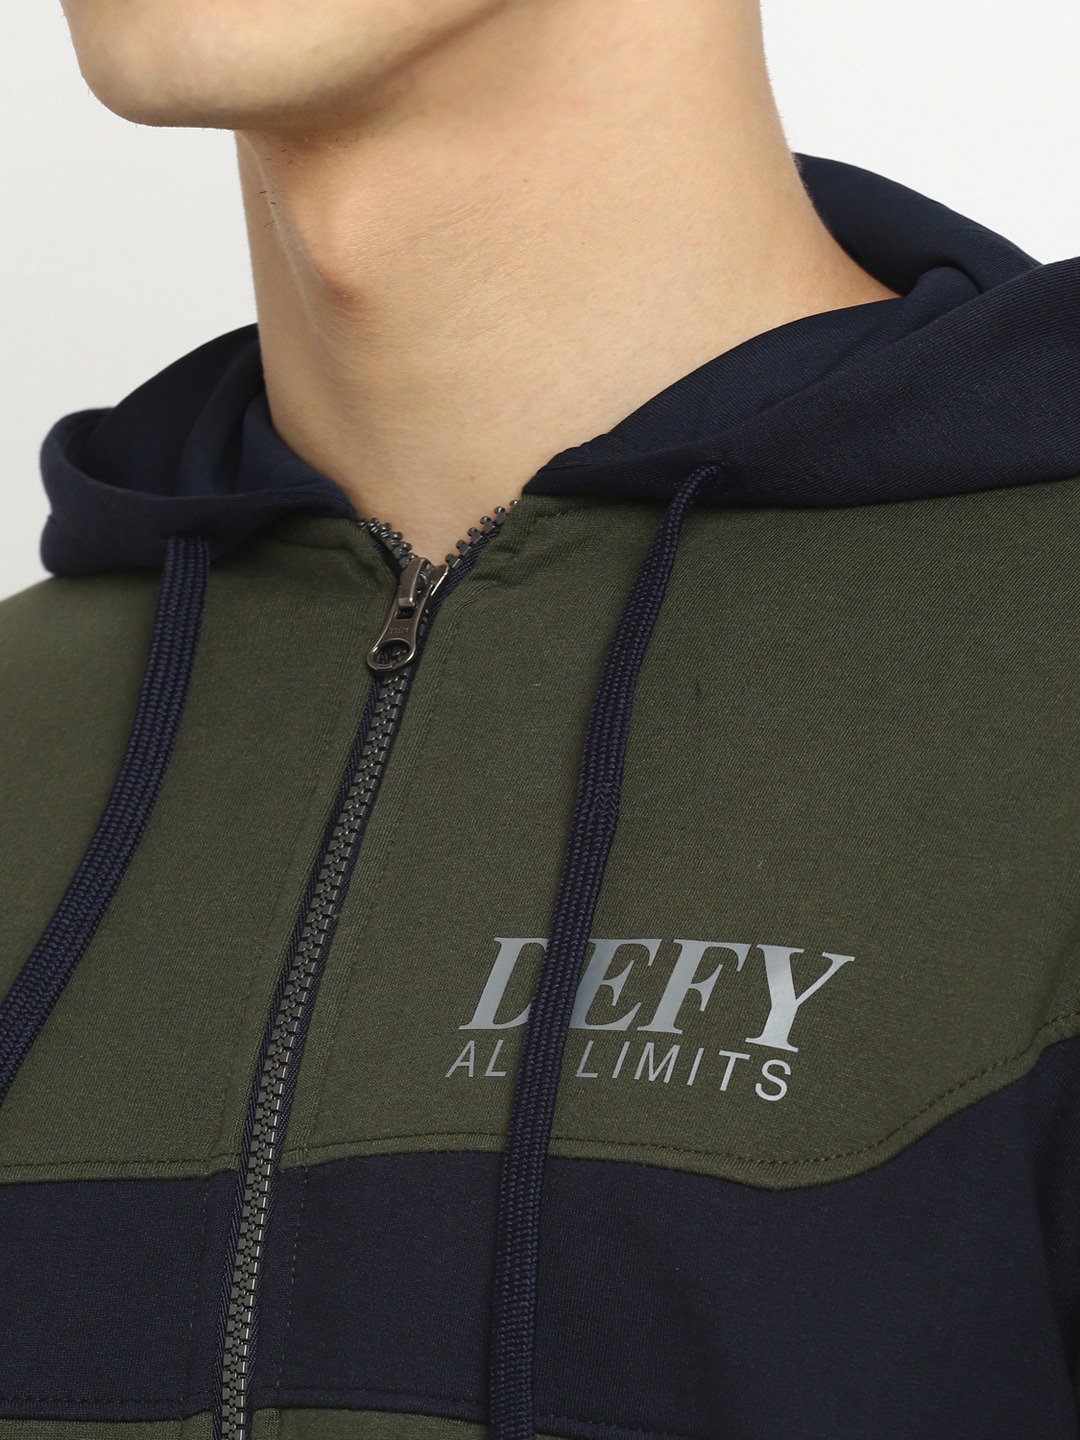 Clothing Tracksuits | OFF LIMITS Men Olive Green & Blue Colourblocked Hooded Tracksuit - XO13180